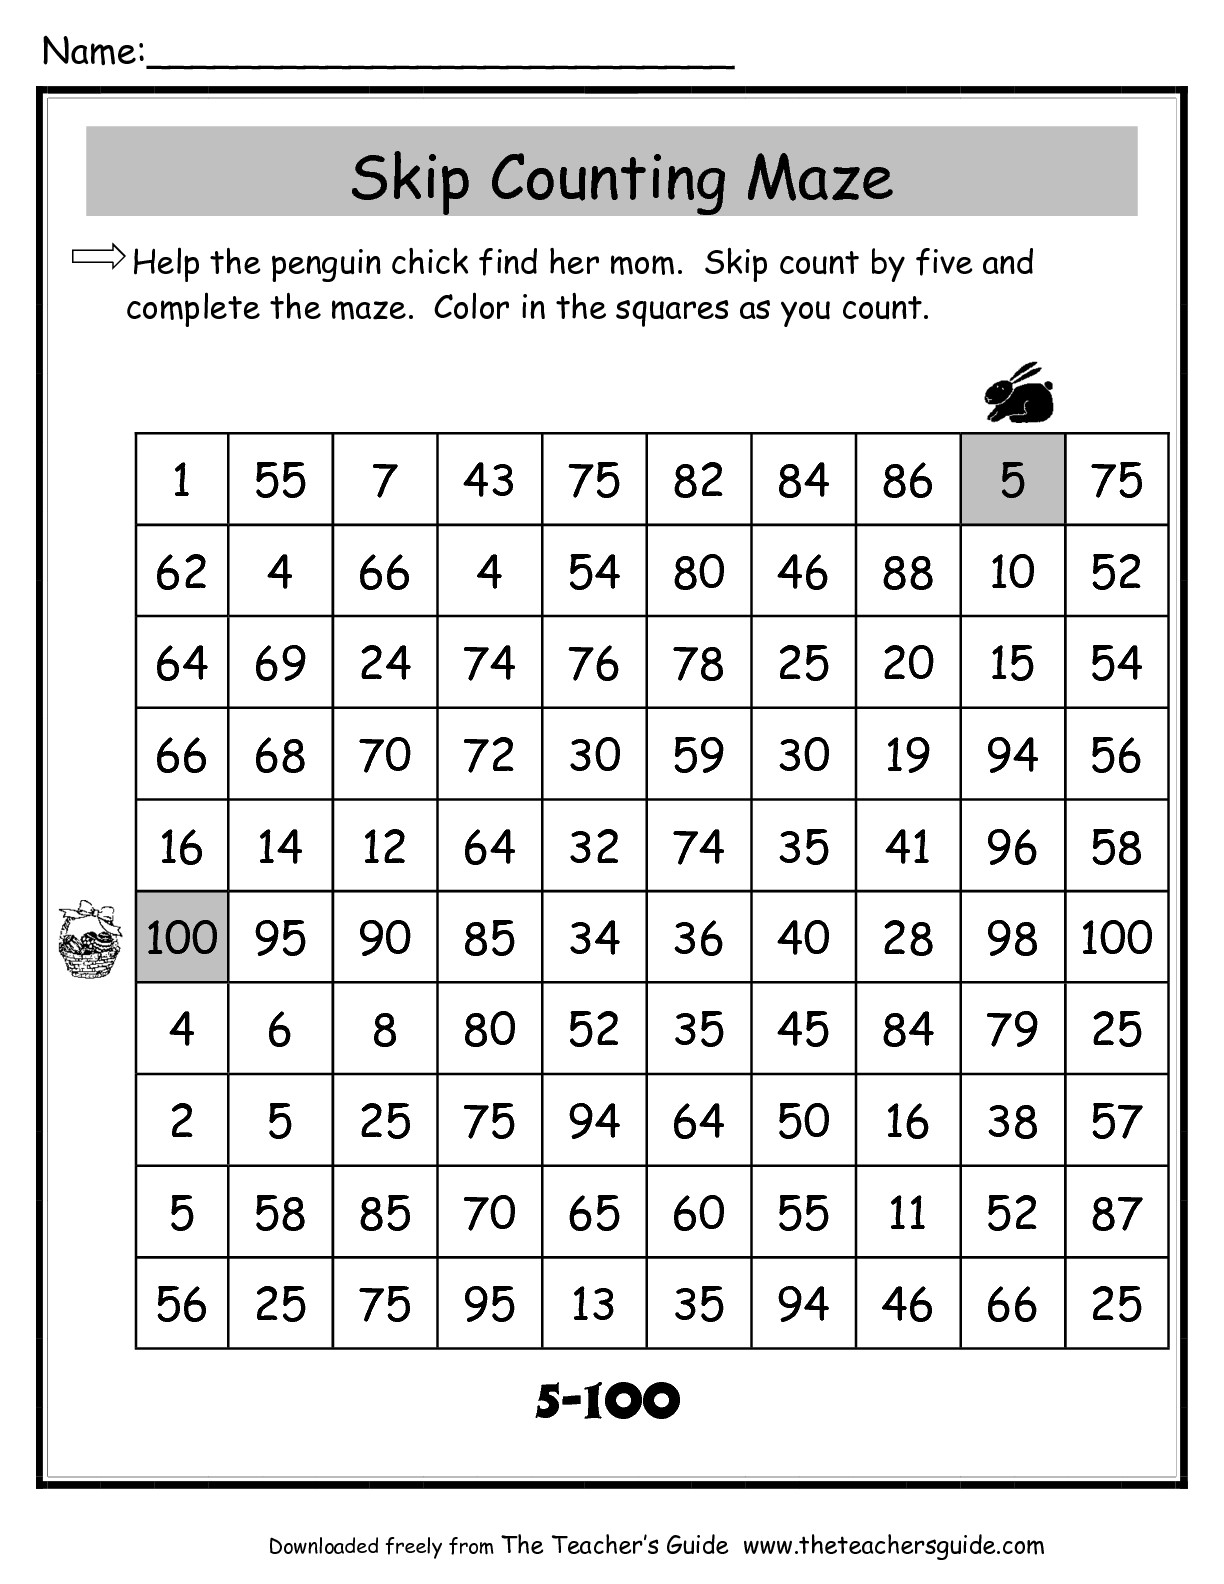 Skip Counting by 5 Image